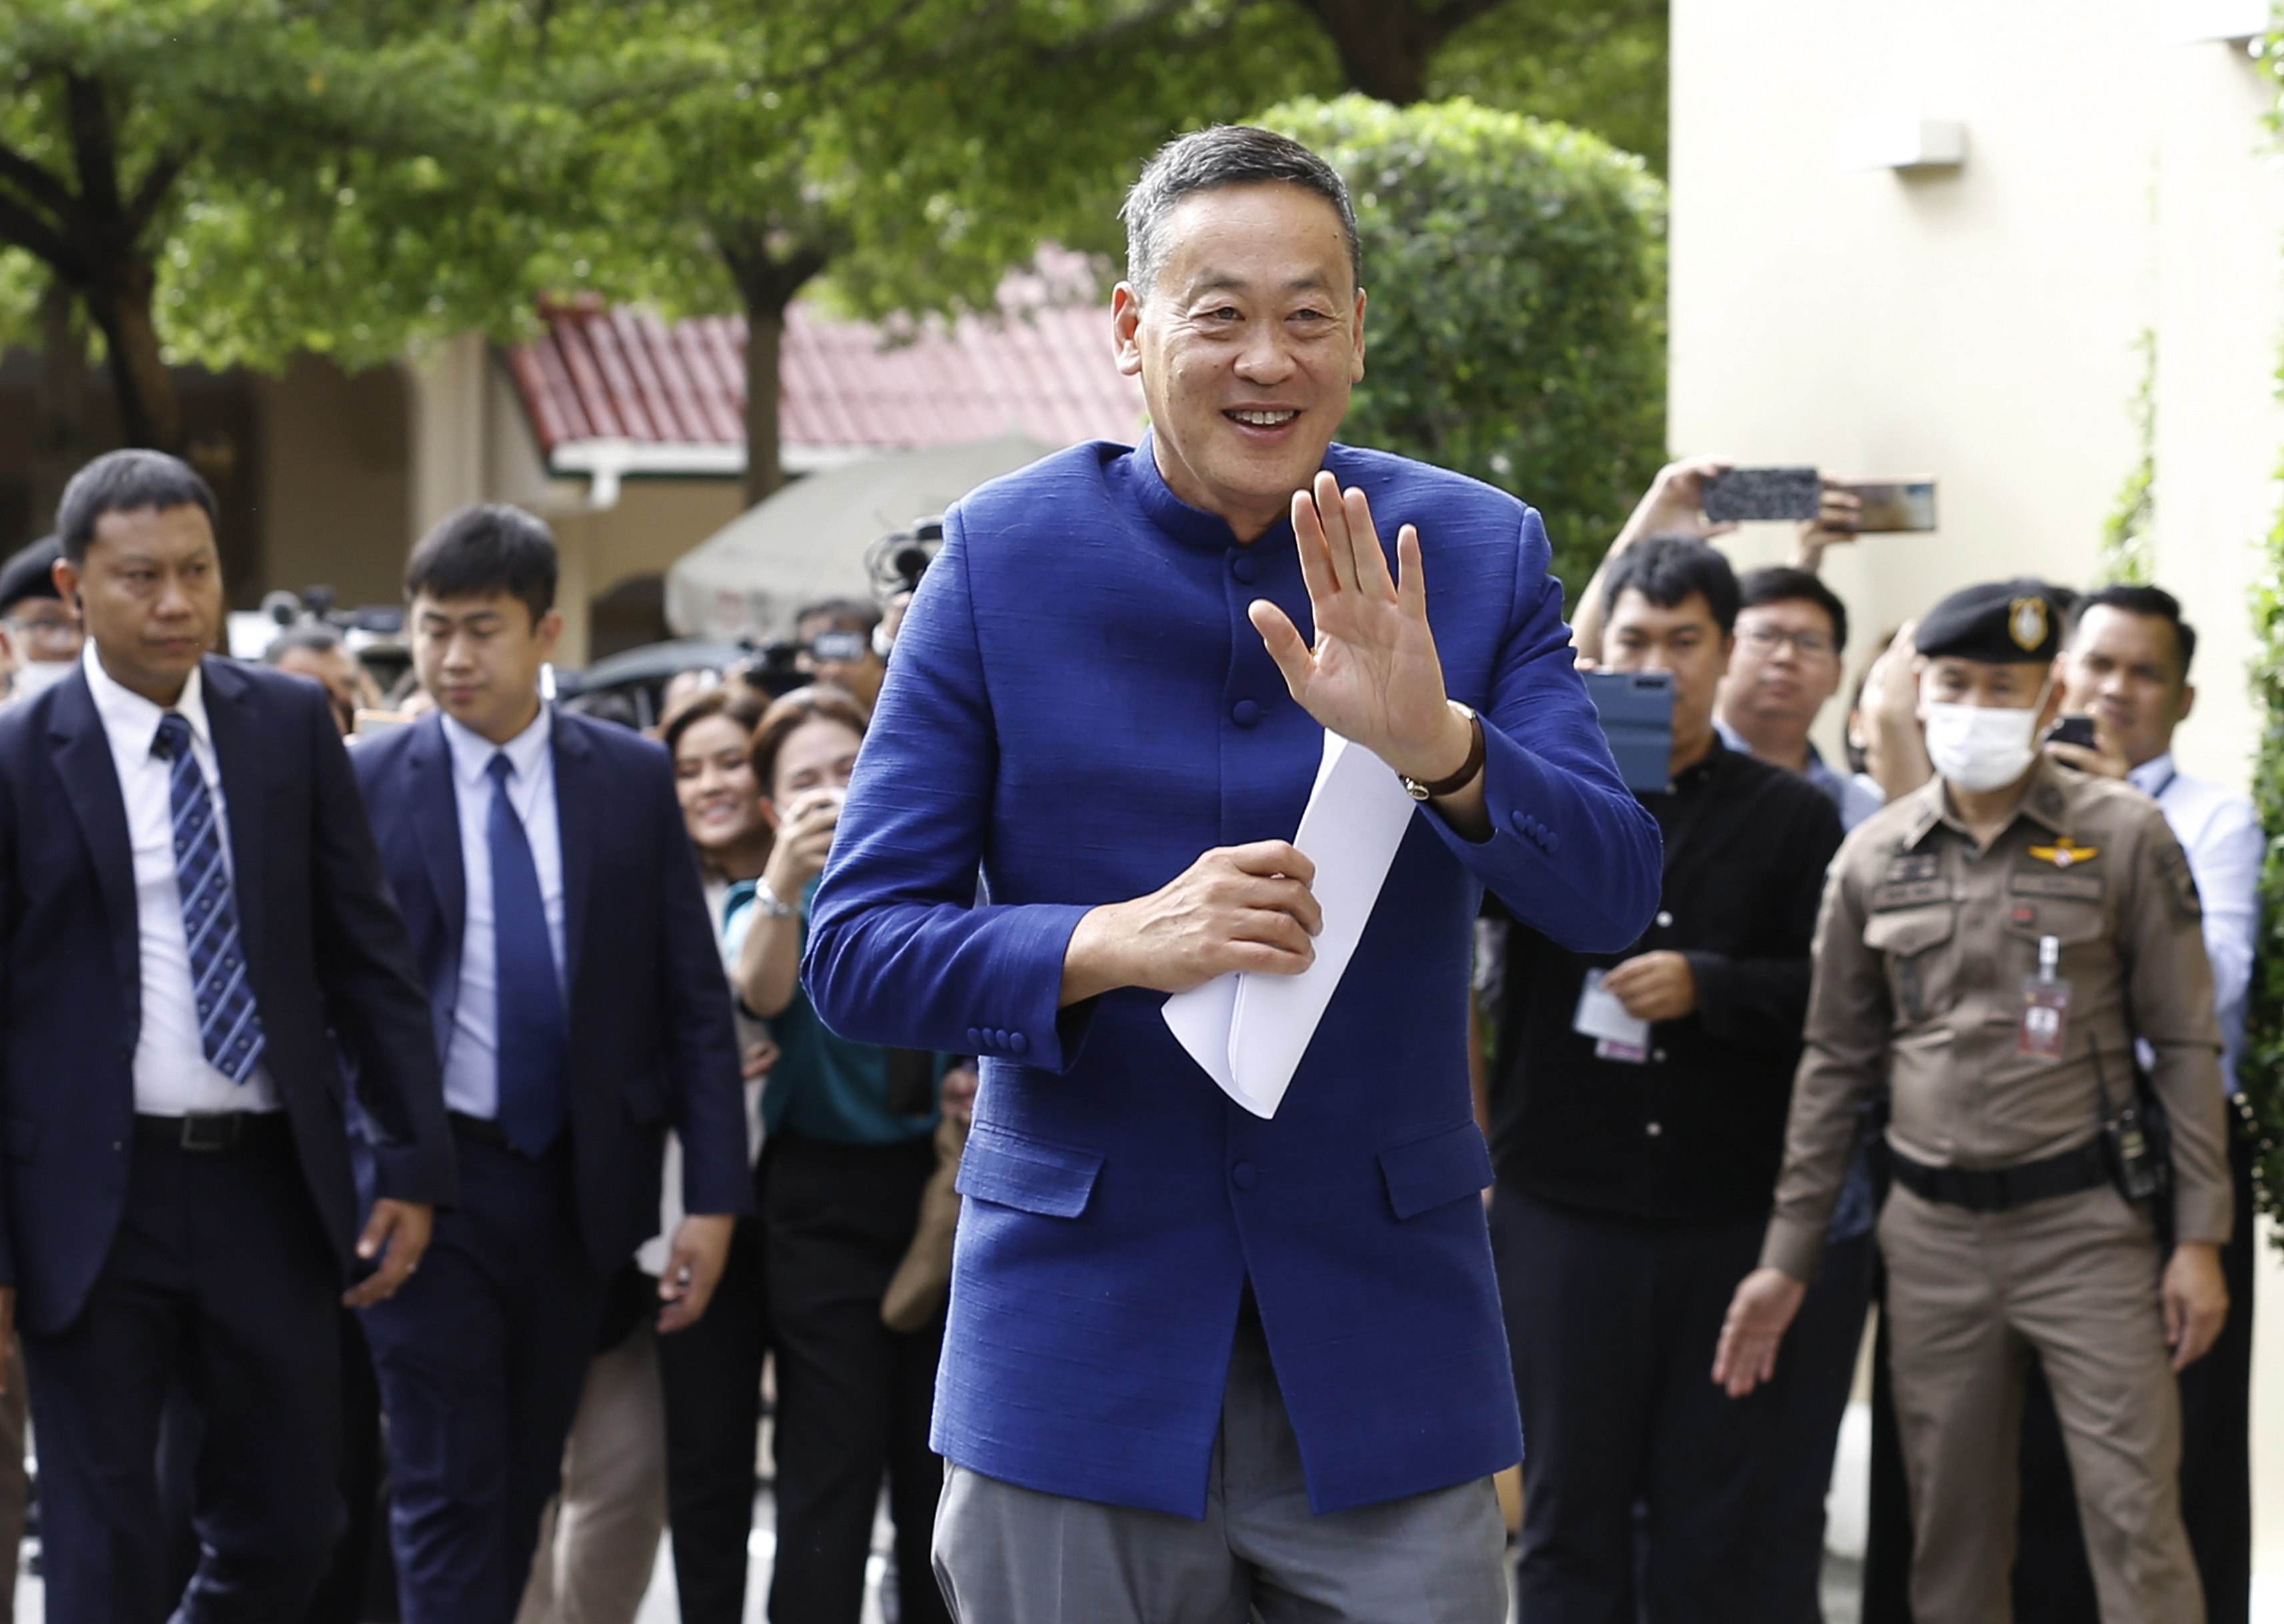 Thai Prime Minister Srettha Thavisin gestures last week as he arrives for his first official cabinet meeting at Government House. He is is in New York this week for the United Nations General Assembly. Photo: EPA-EFE